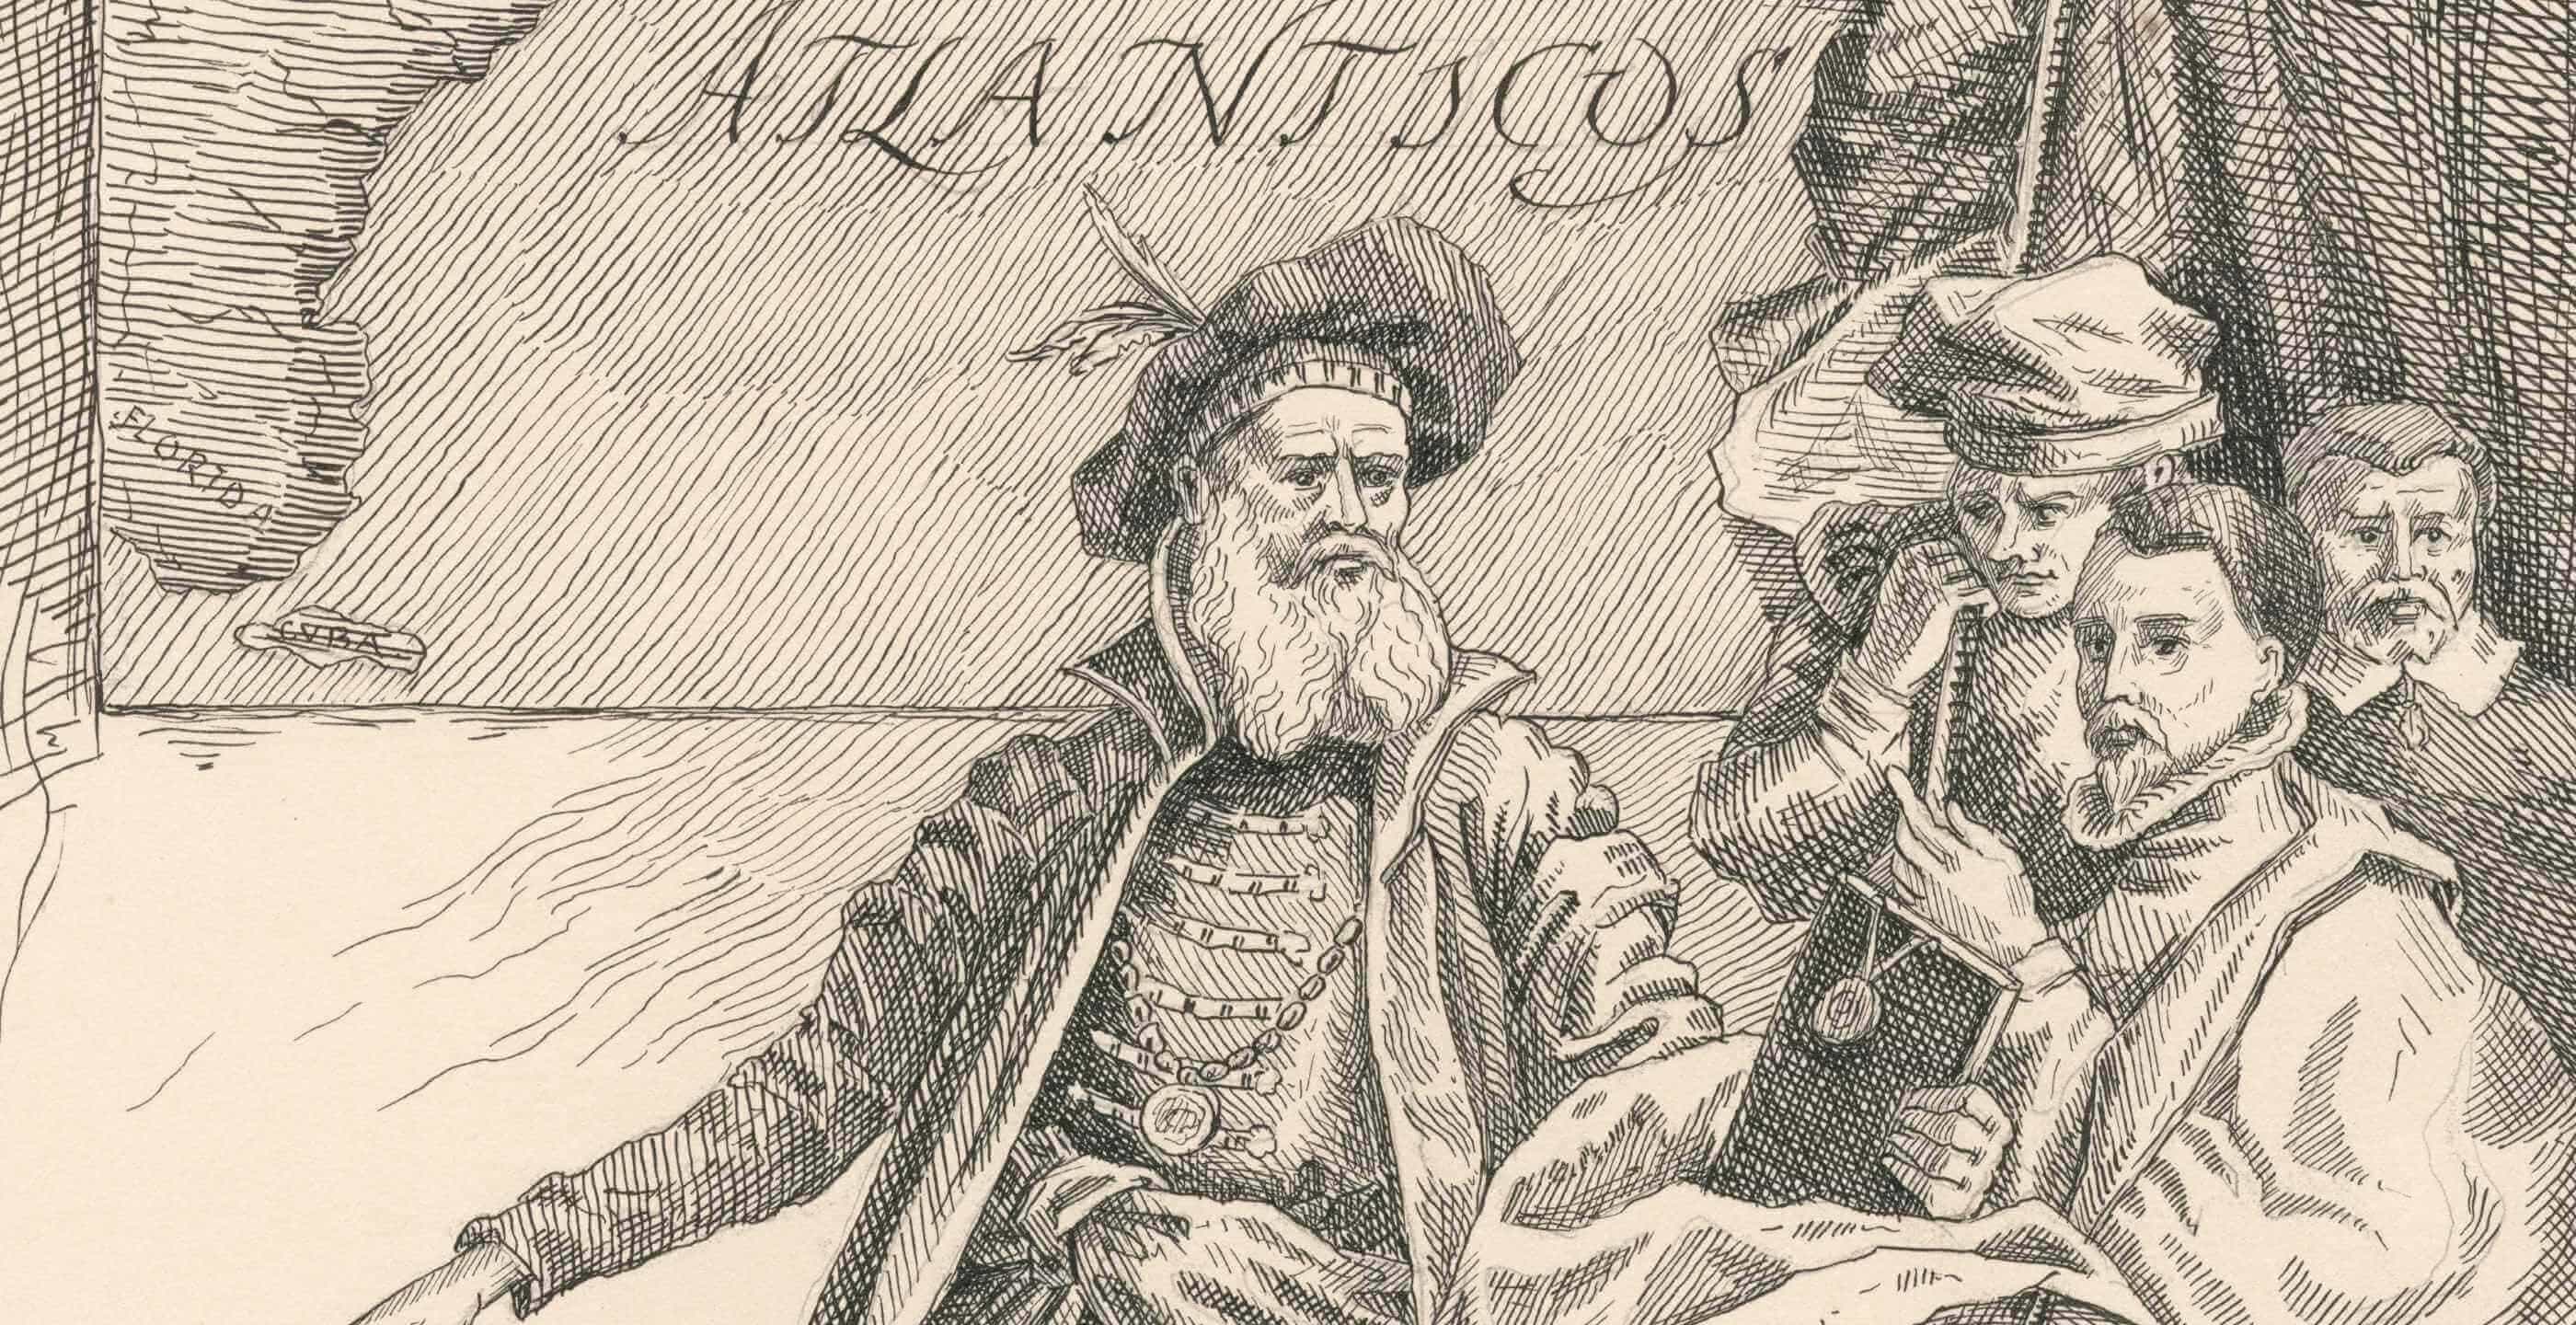 how long was john cabot's first voyage